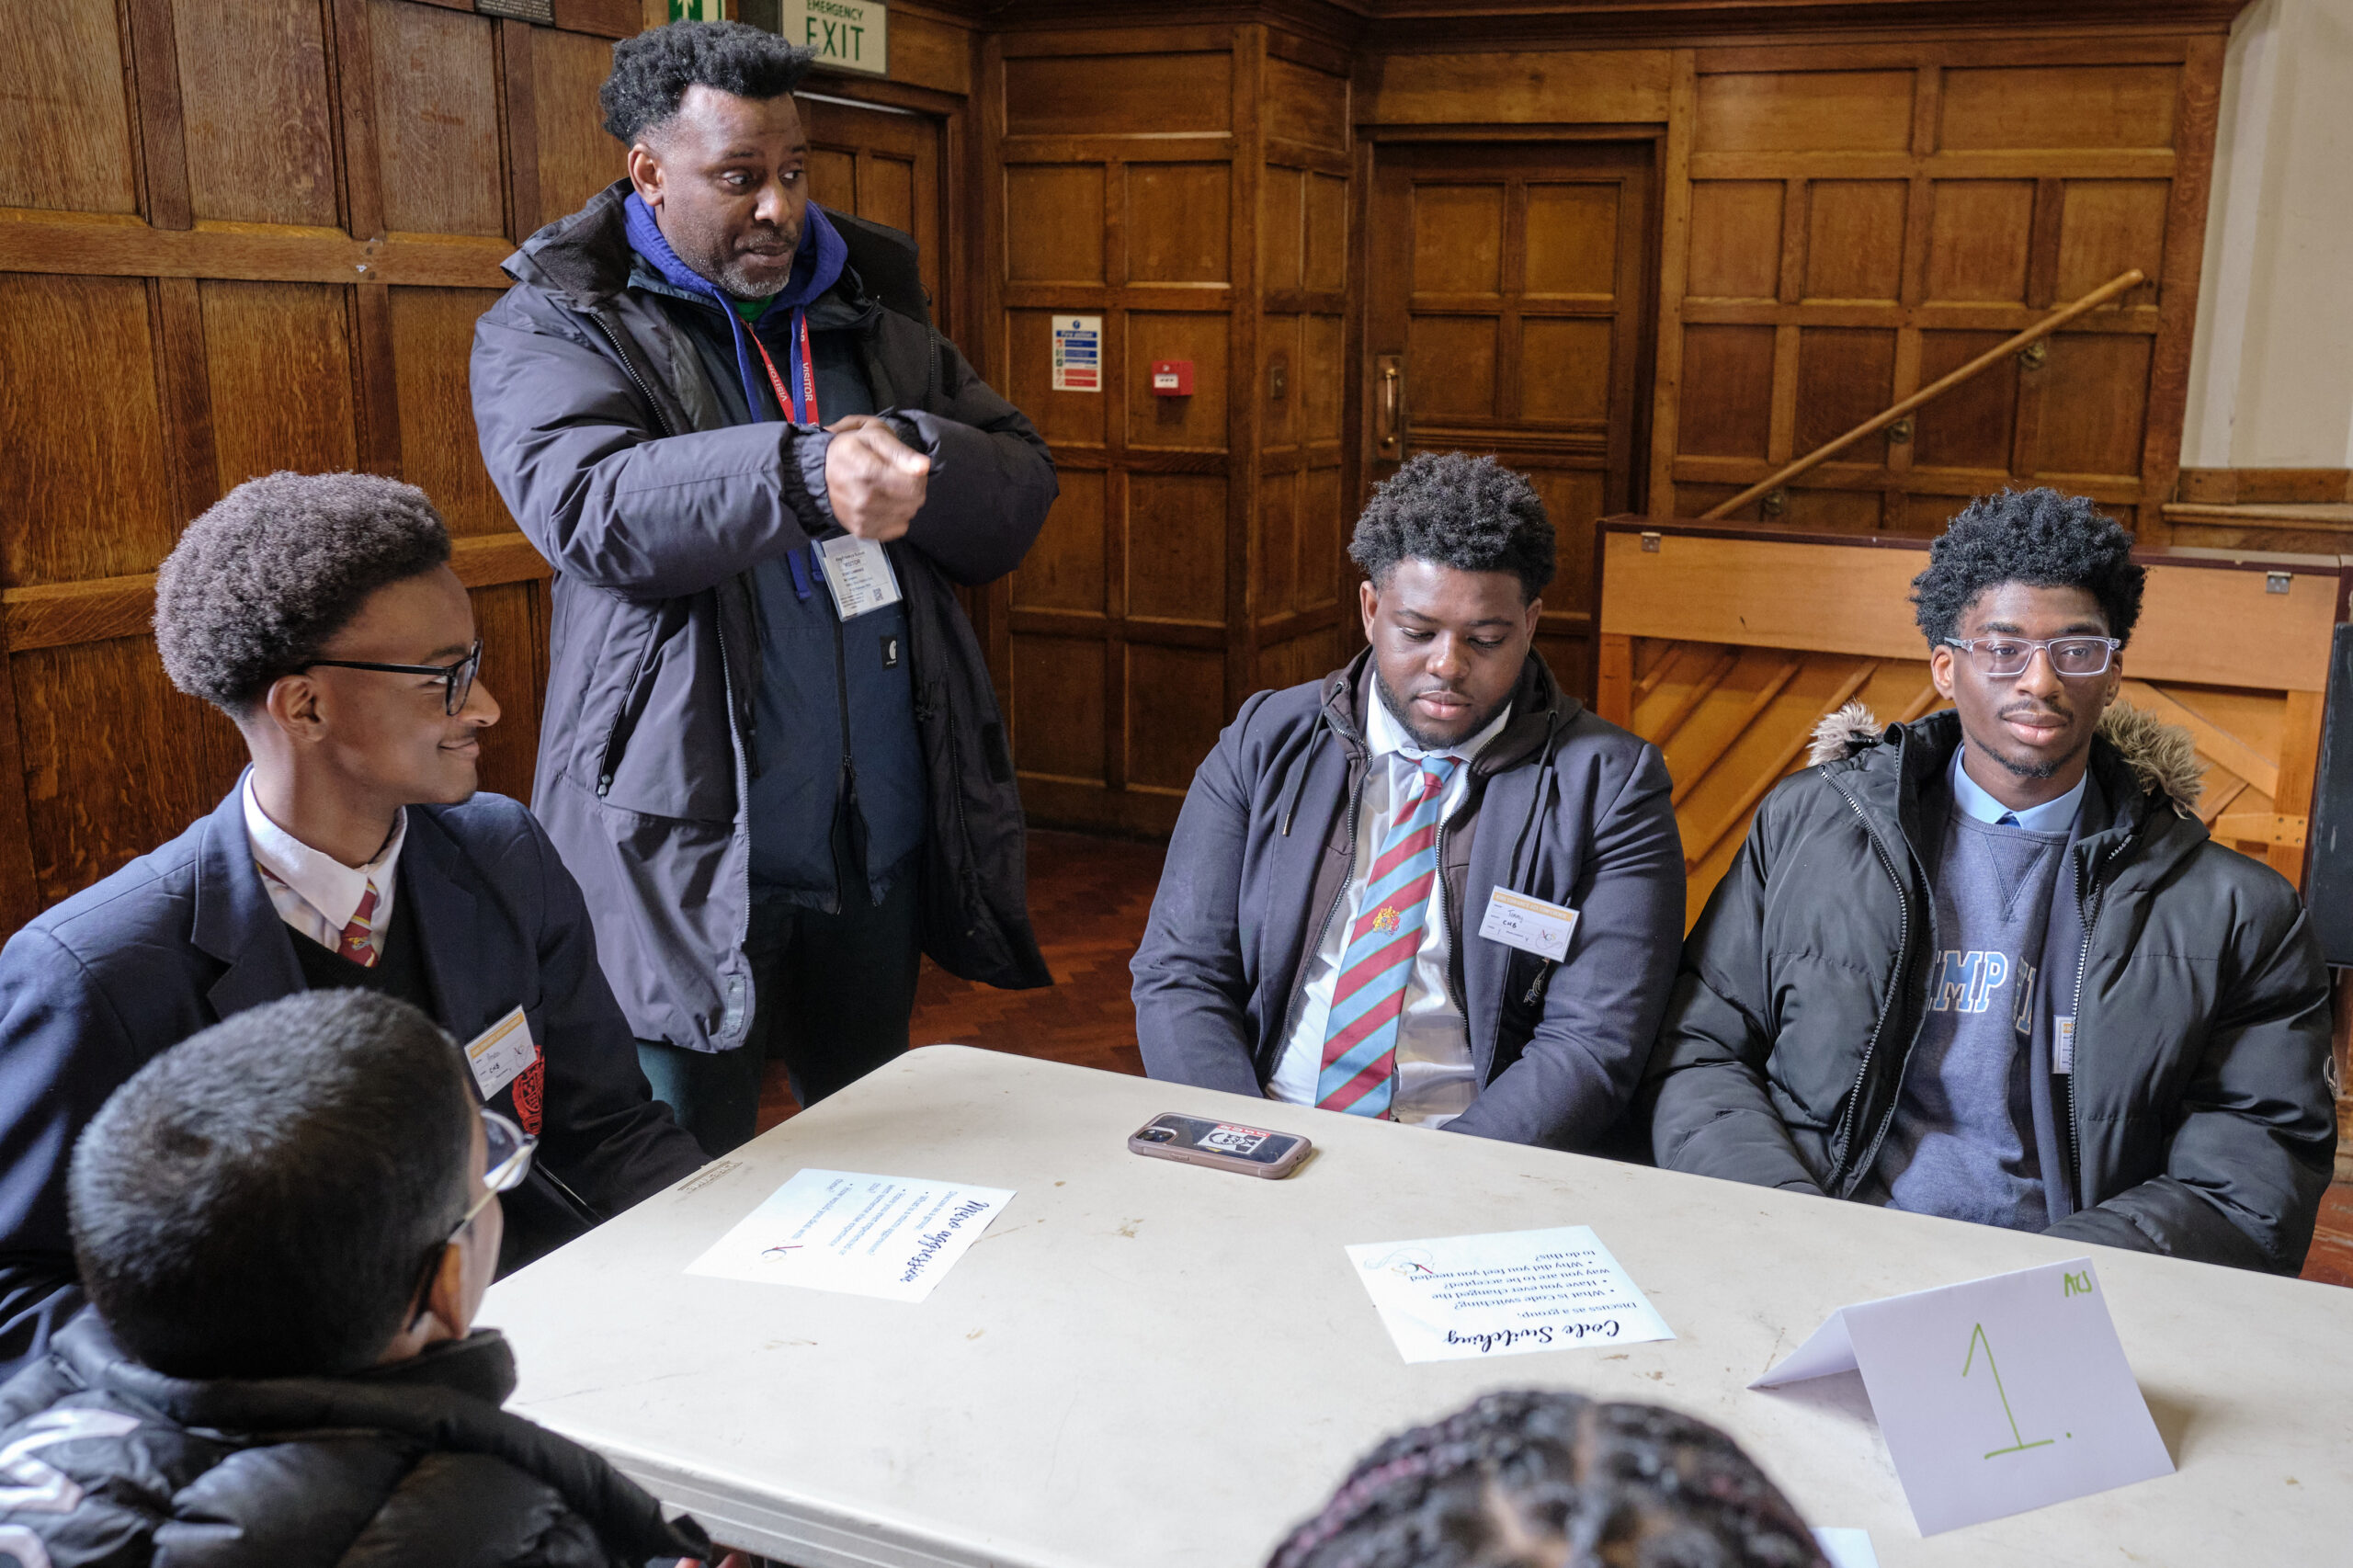 The King Edward’s African and Caribbean Society Conference at King Edward’s School, Birmingham Performing Arts Centre on Friday 23 February 2024.